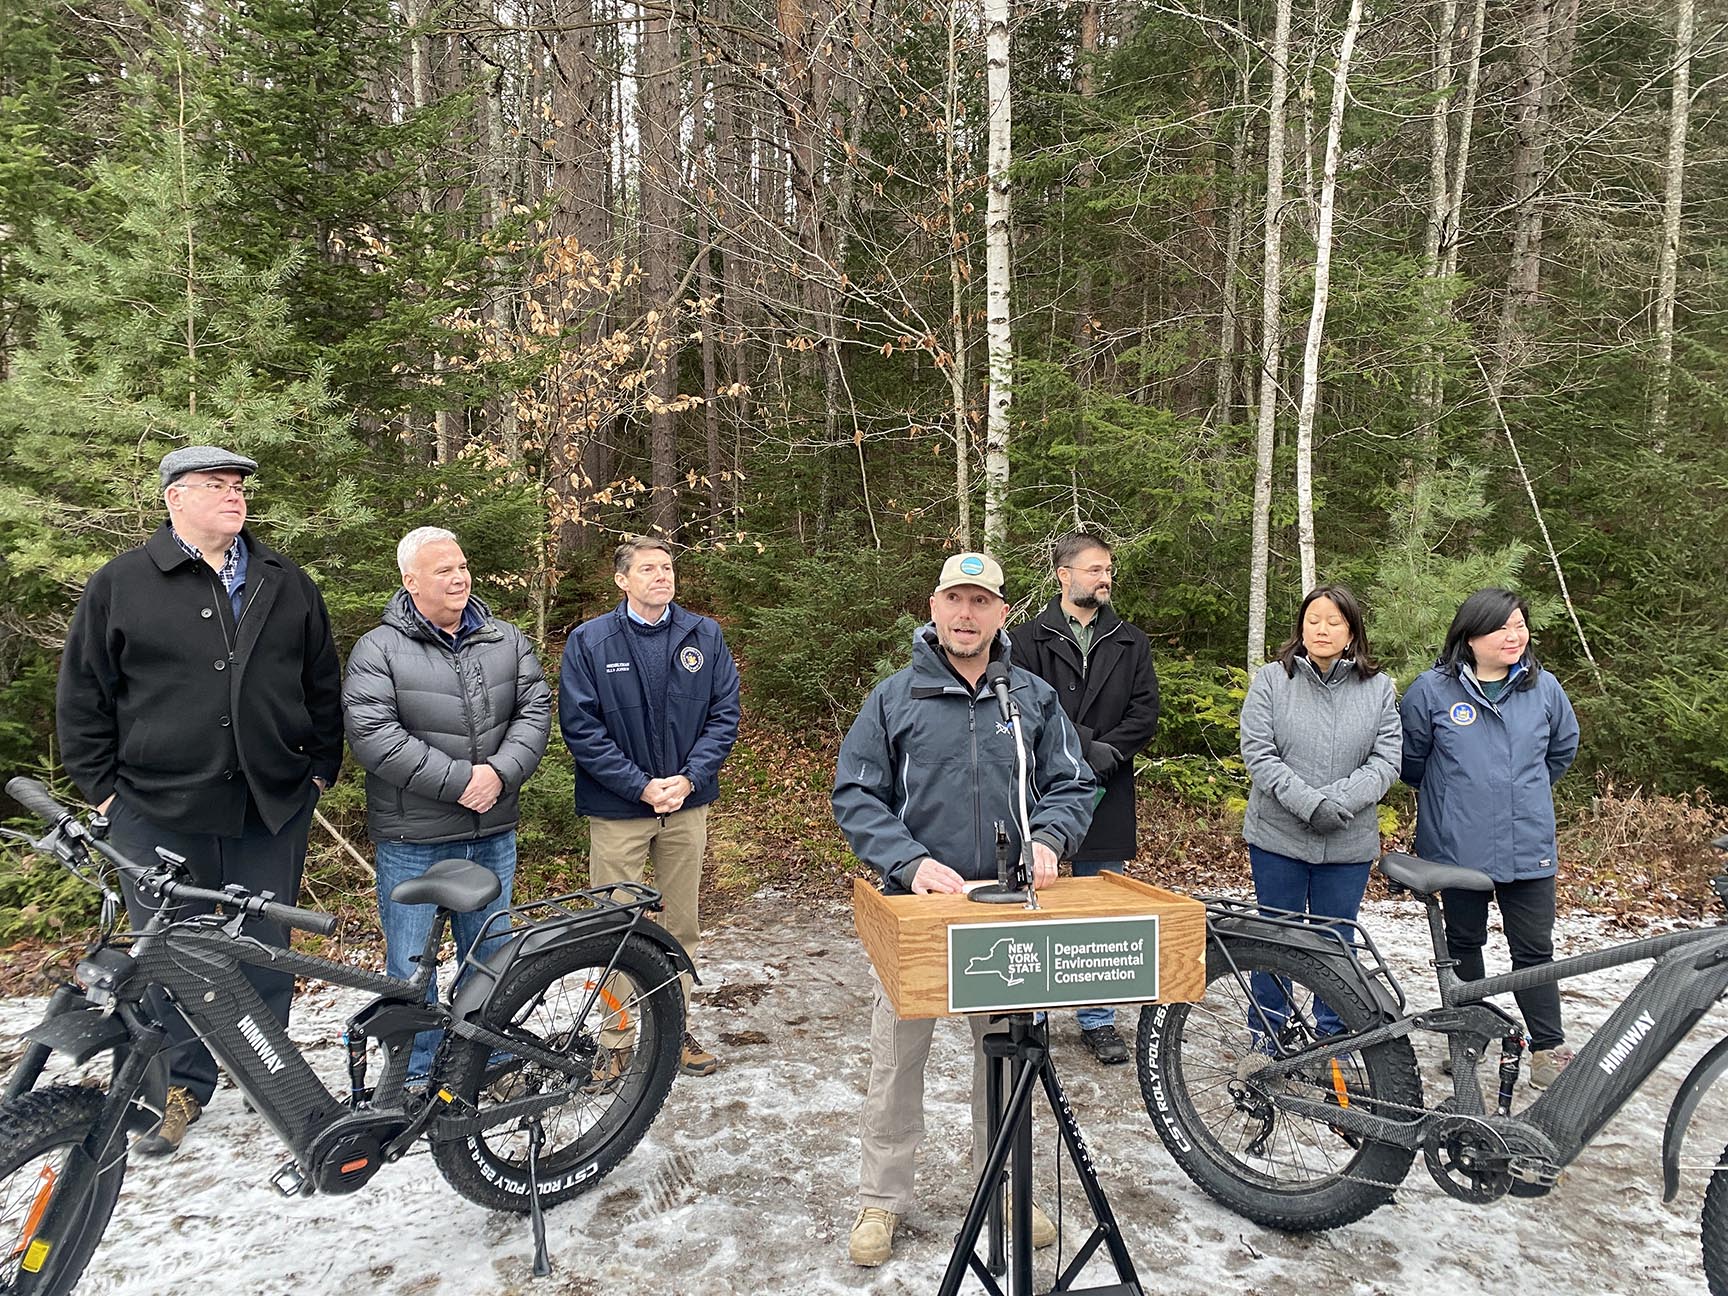 DEC Commissioner Basil Seggos announces the opening of the rail trail between Saranac Lake and Lake Placid. Photo by Mike Lynch